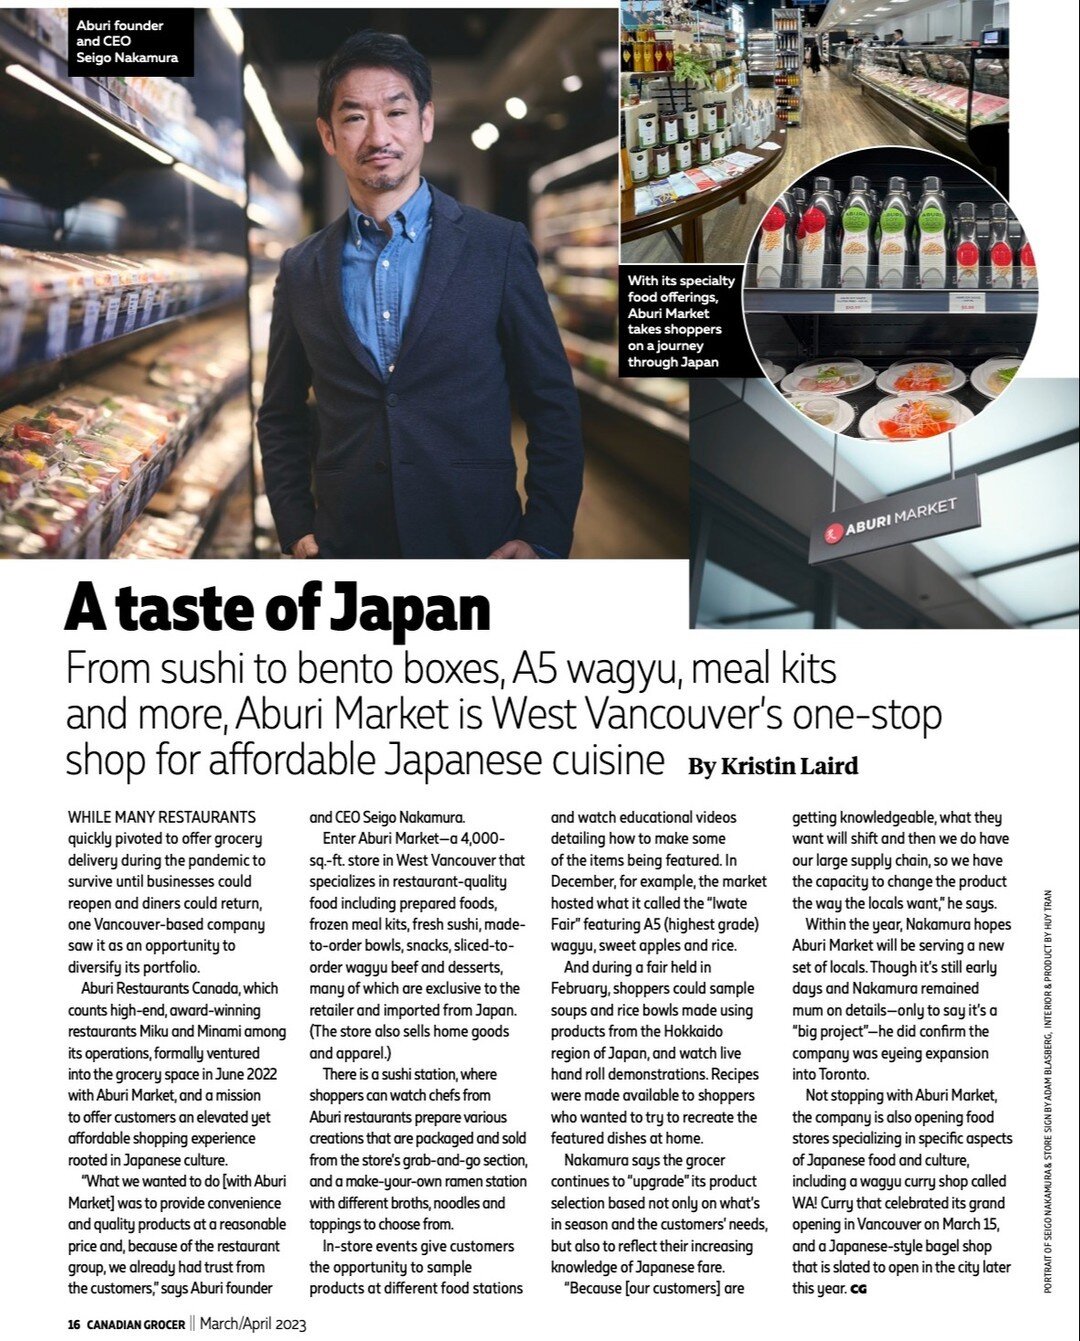 Thank you, @canadiangrocer, for the wonderful feature article. We appreciate your support and are excited to see our store and our CEO &amp; Founder Seigo Nakamura's message shared with your readers.

We strive to continue to provide a taste of Japan